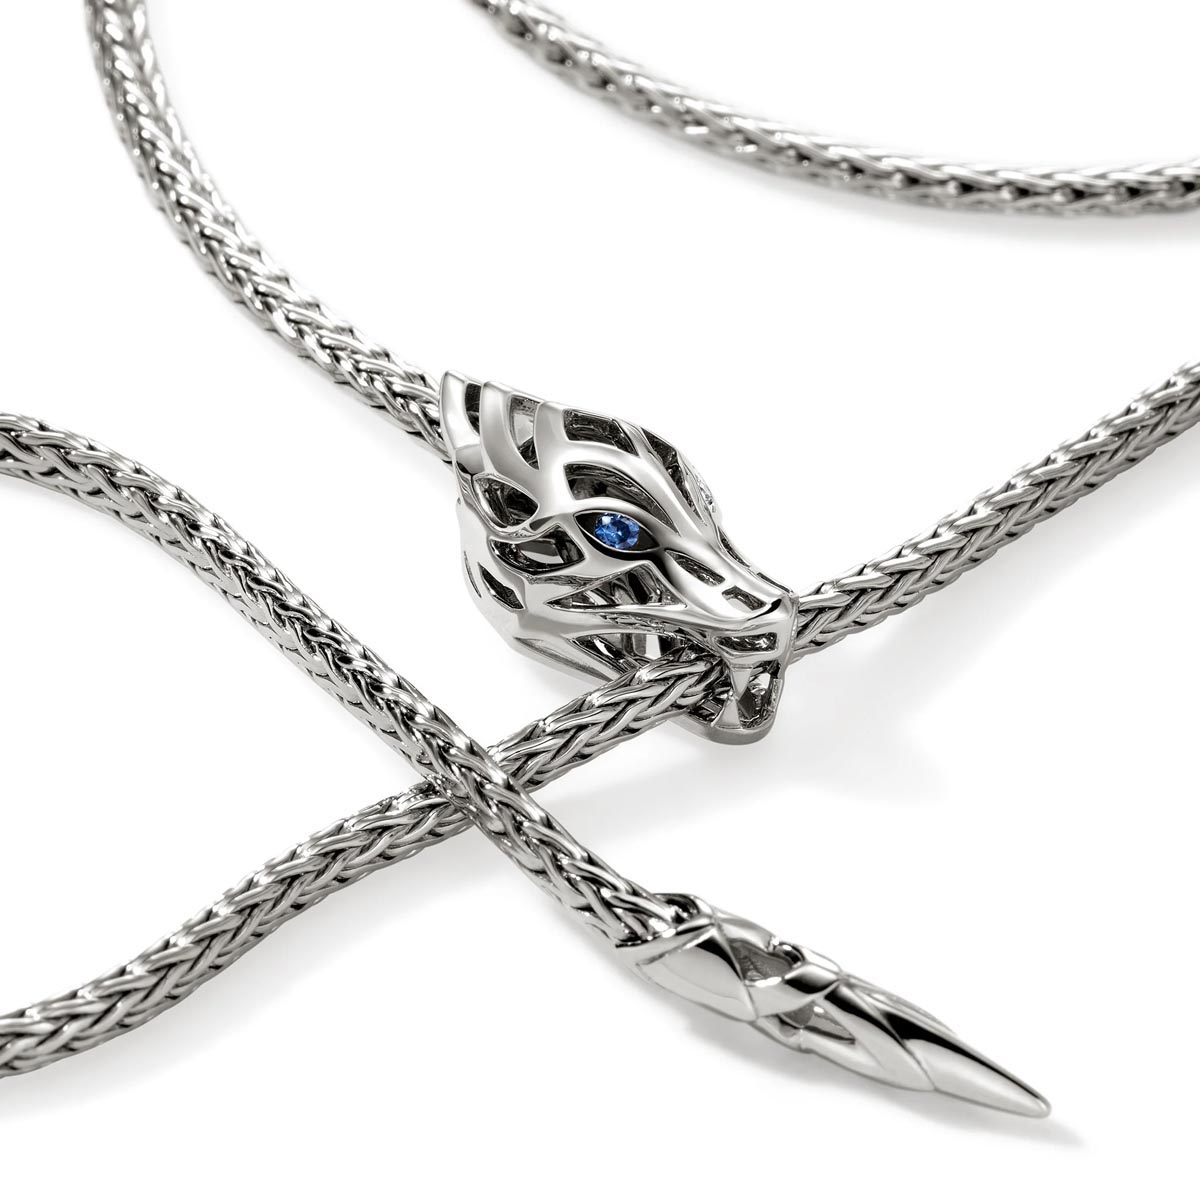 John Hardy Legends Naga Lariat Necklace with Blue Sapphires in Sterling Silver